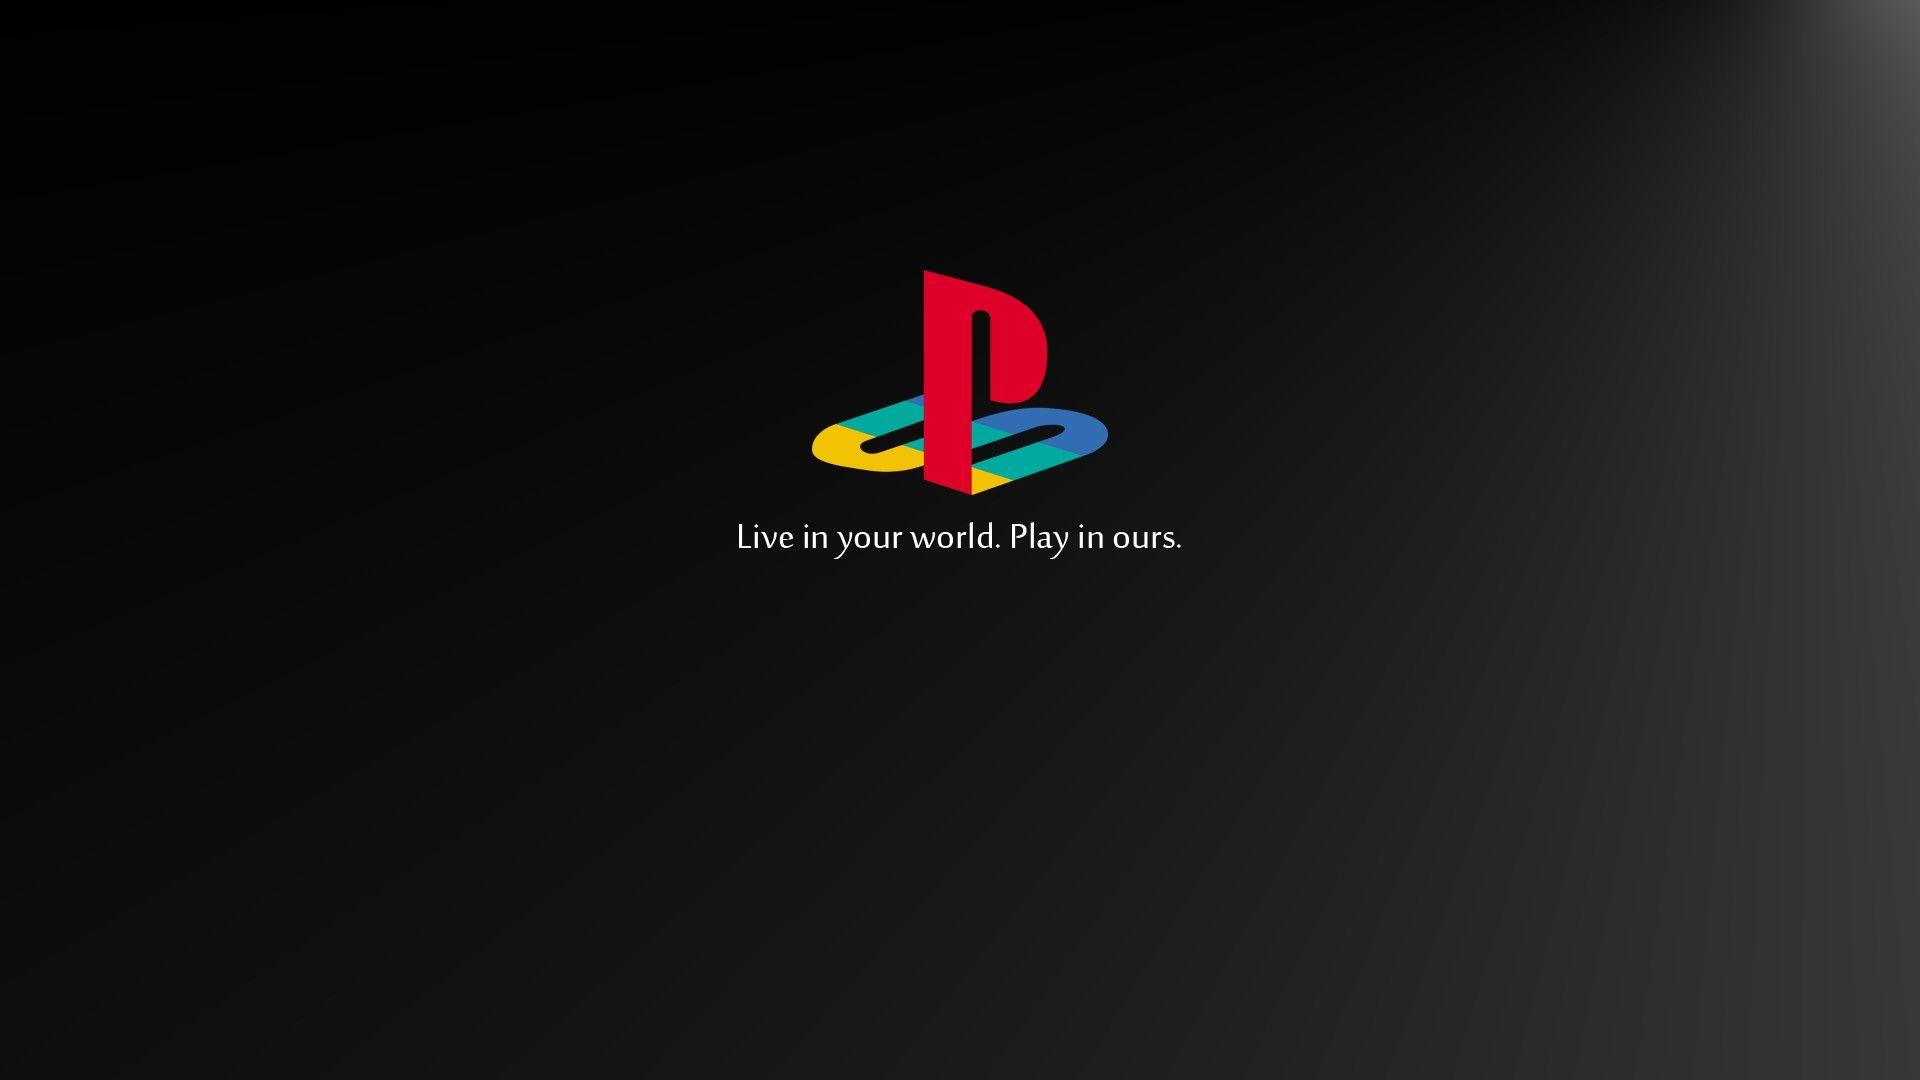 Wallpaper.wiki Playstation Photos PIC WPE001756